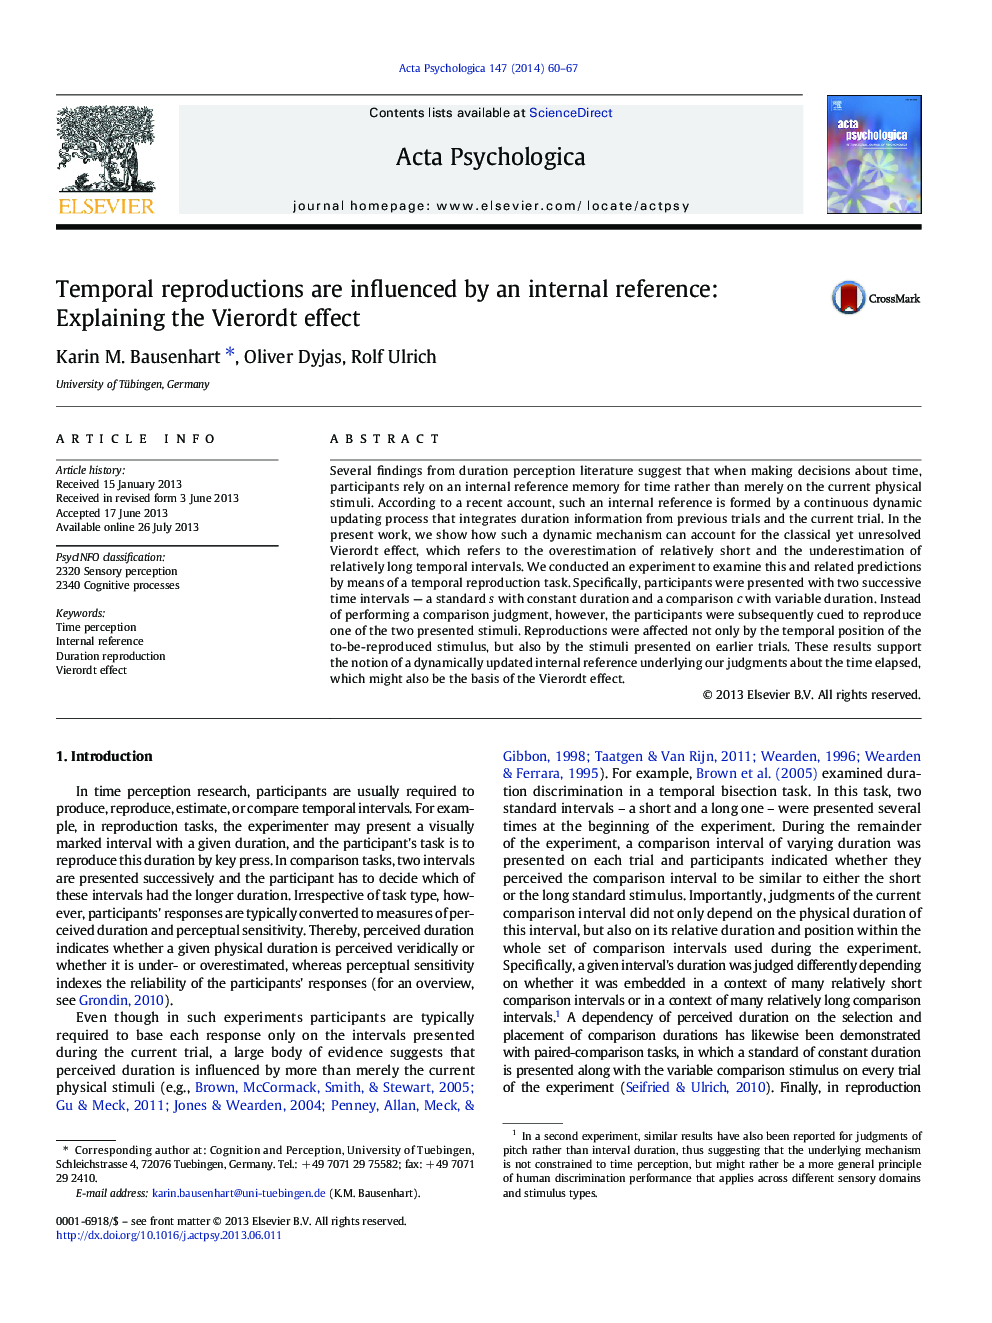 Temporal reproductions are influenced by an internal reference: Explaining the Vierordt effect